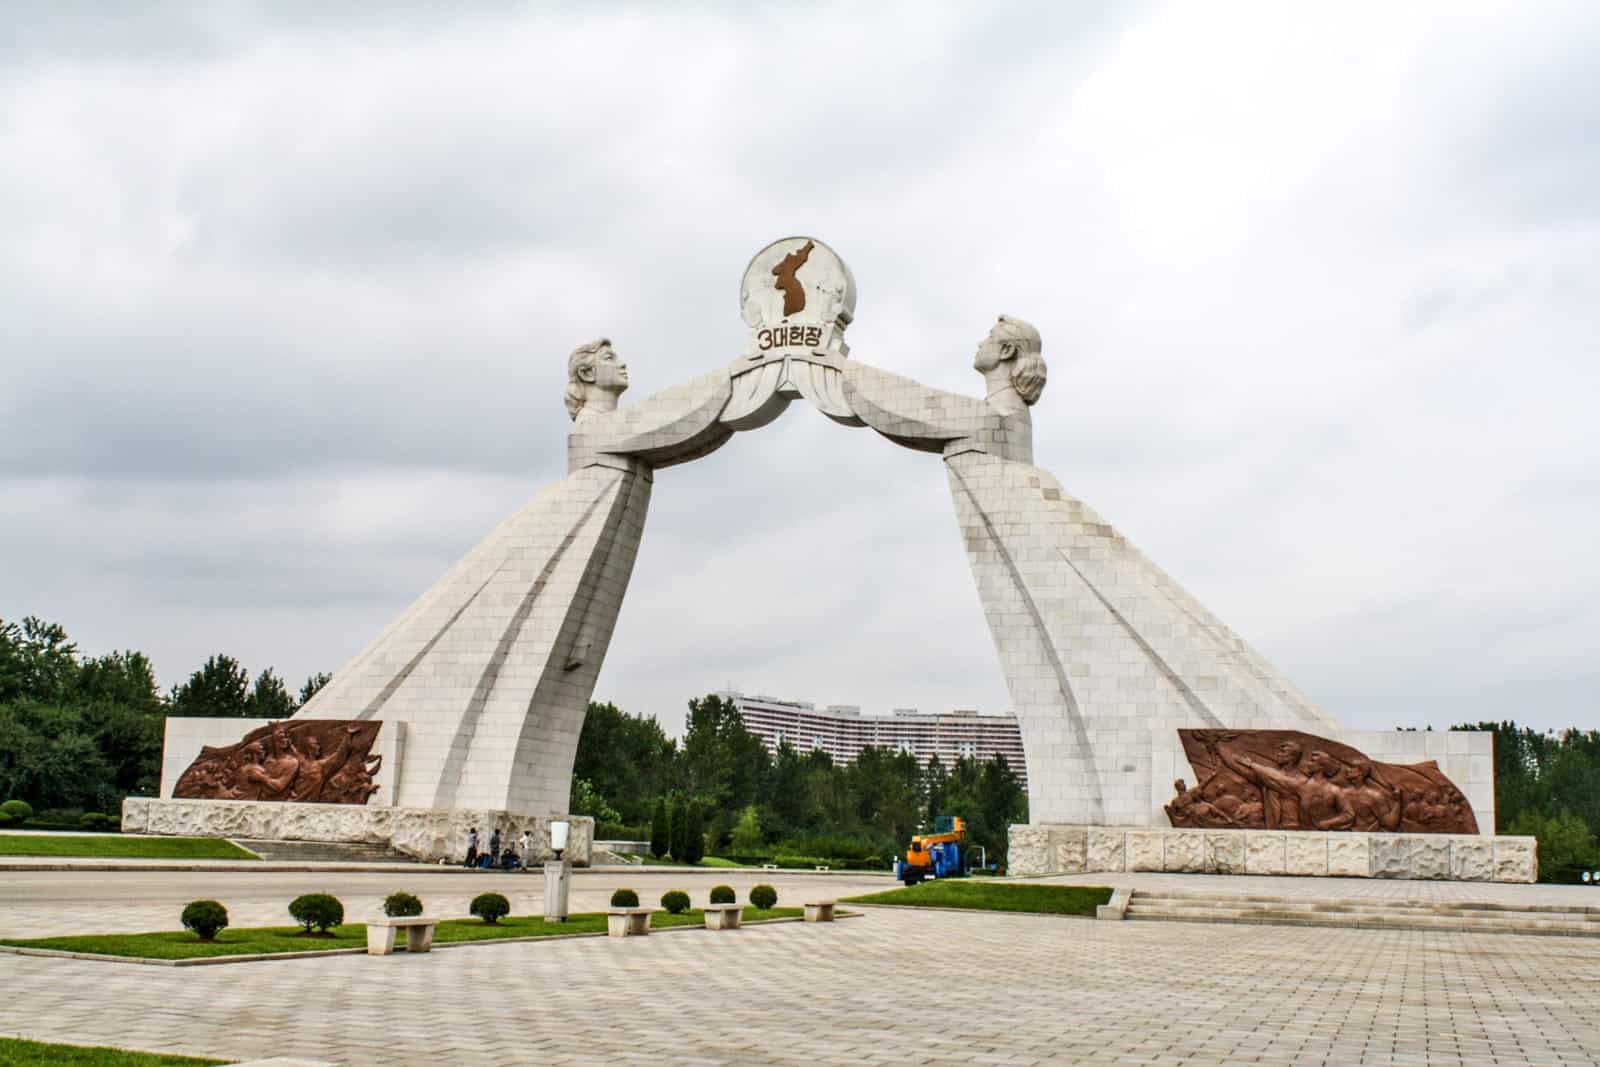 One of the communist style monuments in North Korea you are shown in a travel tour